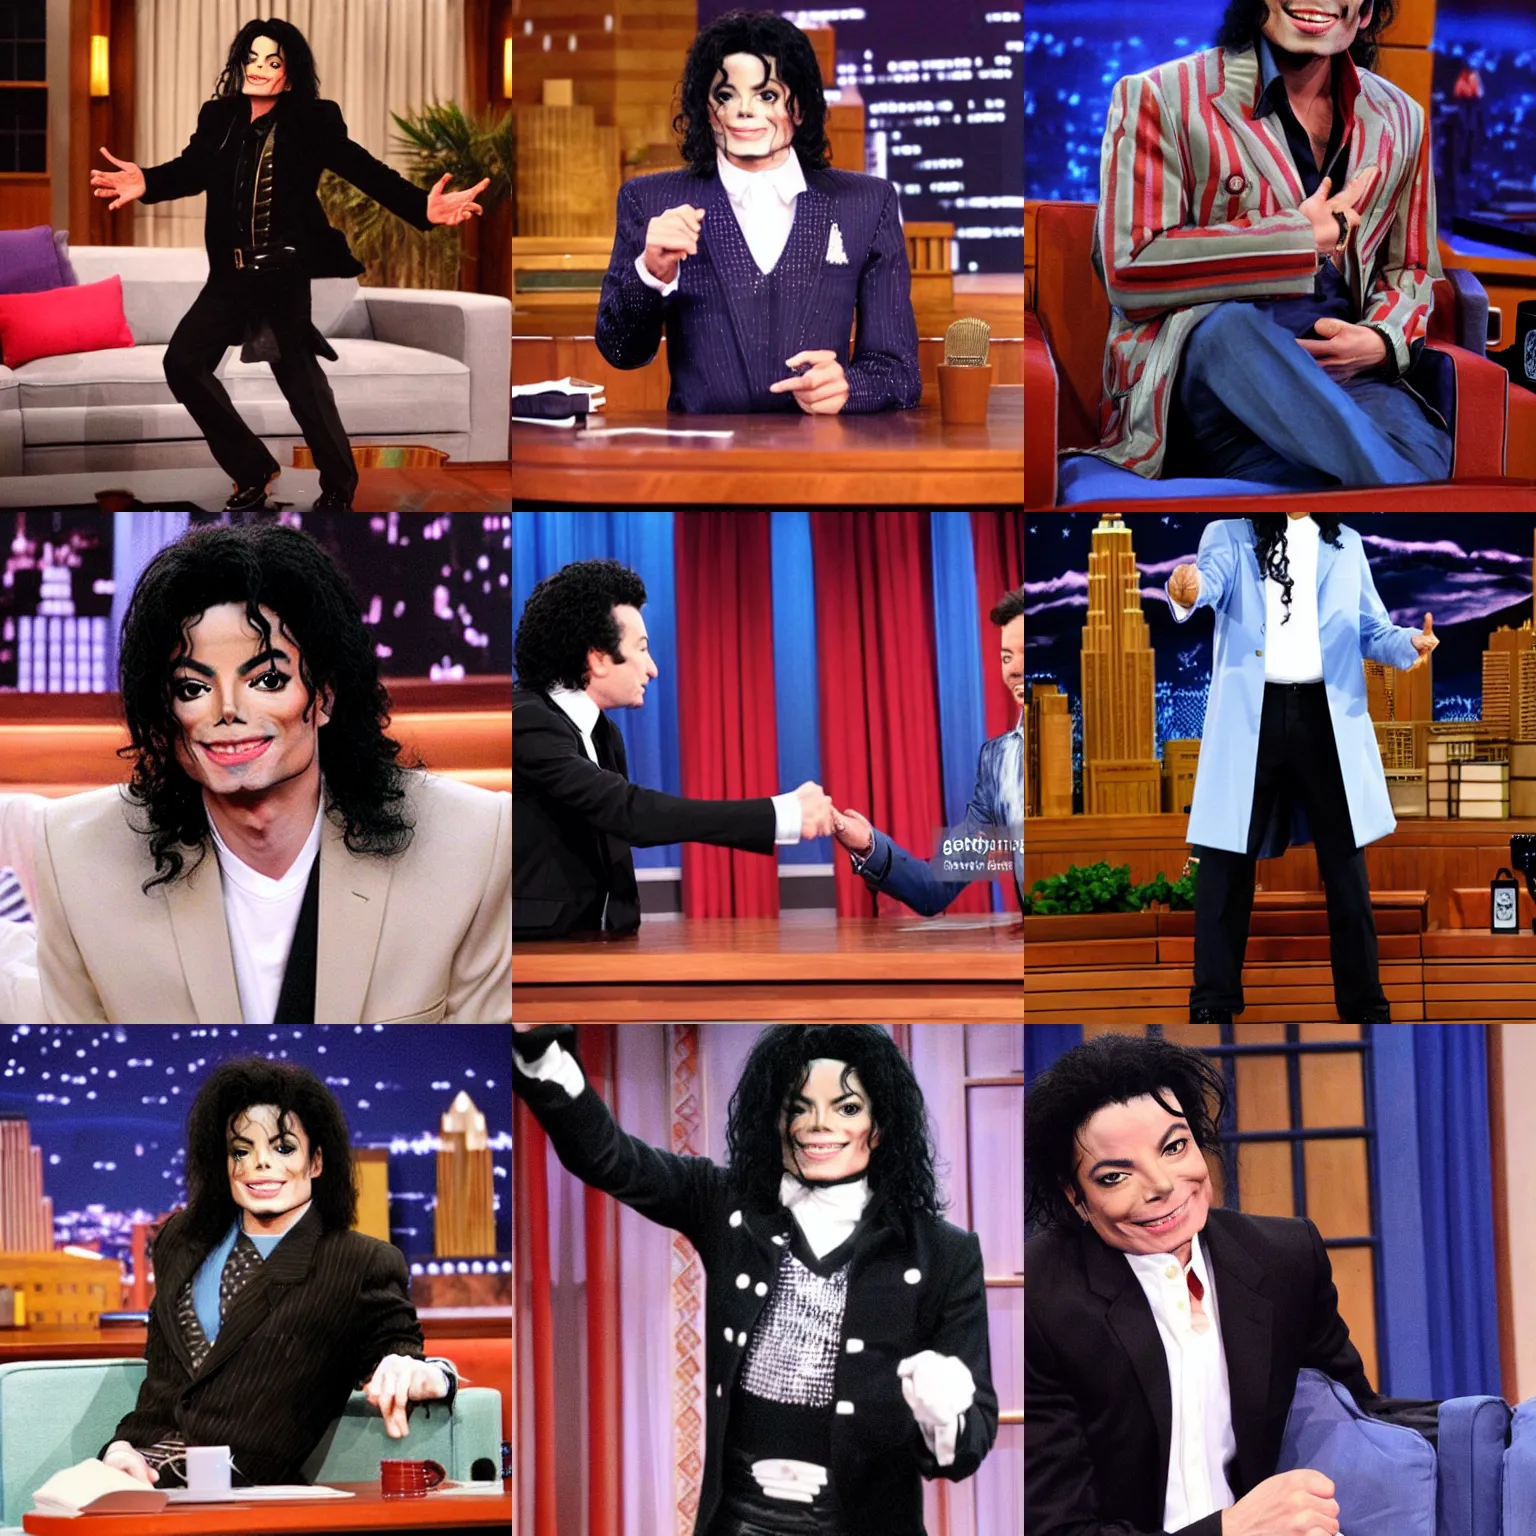 Prompt: michael jackson as jimmy fallon, still from late night tv show